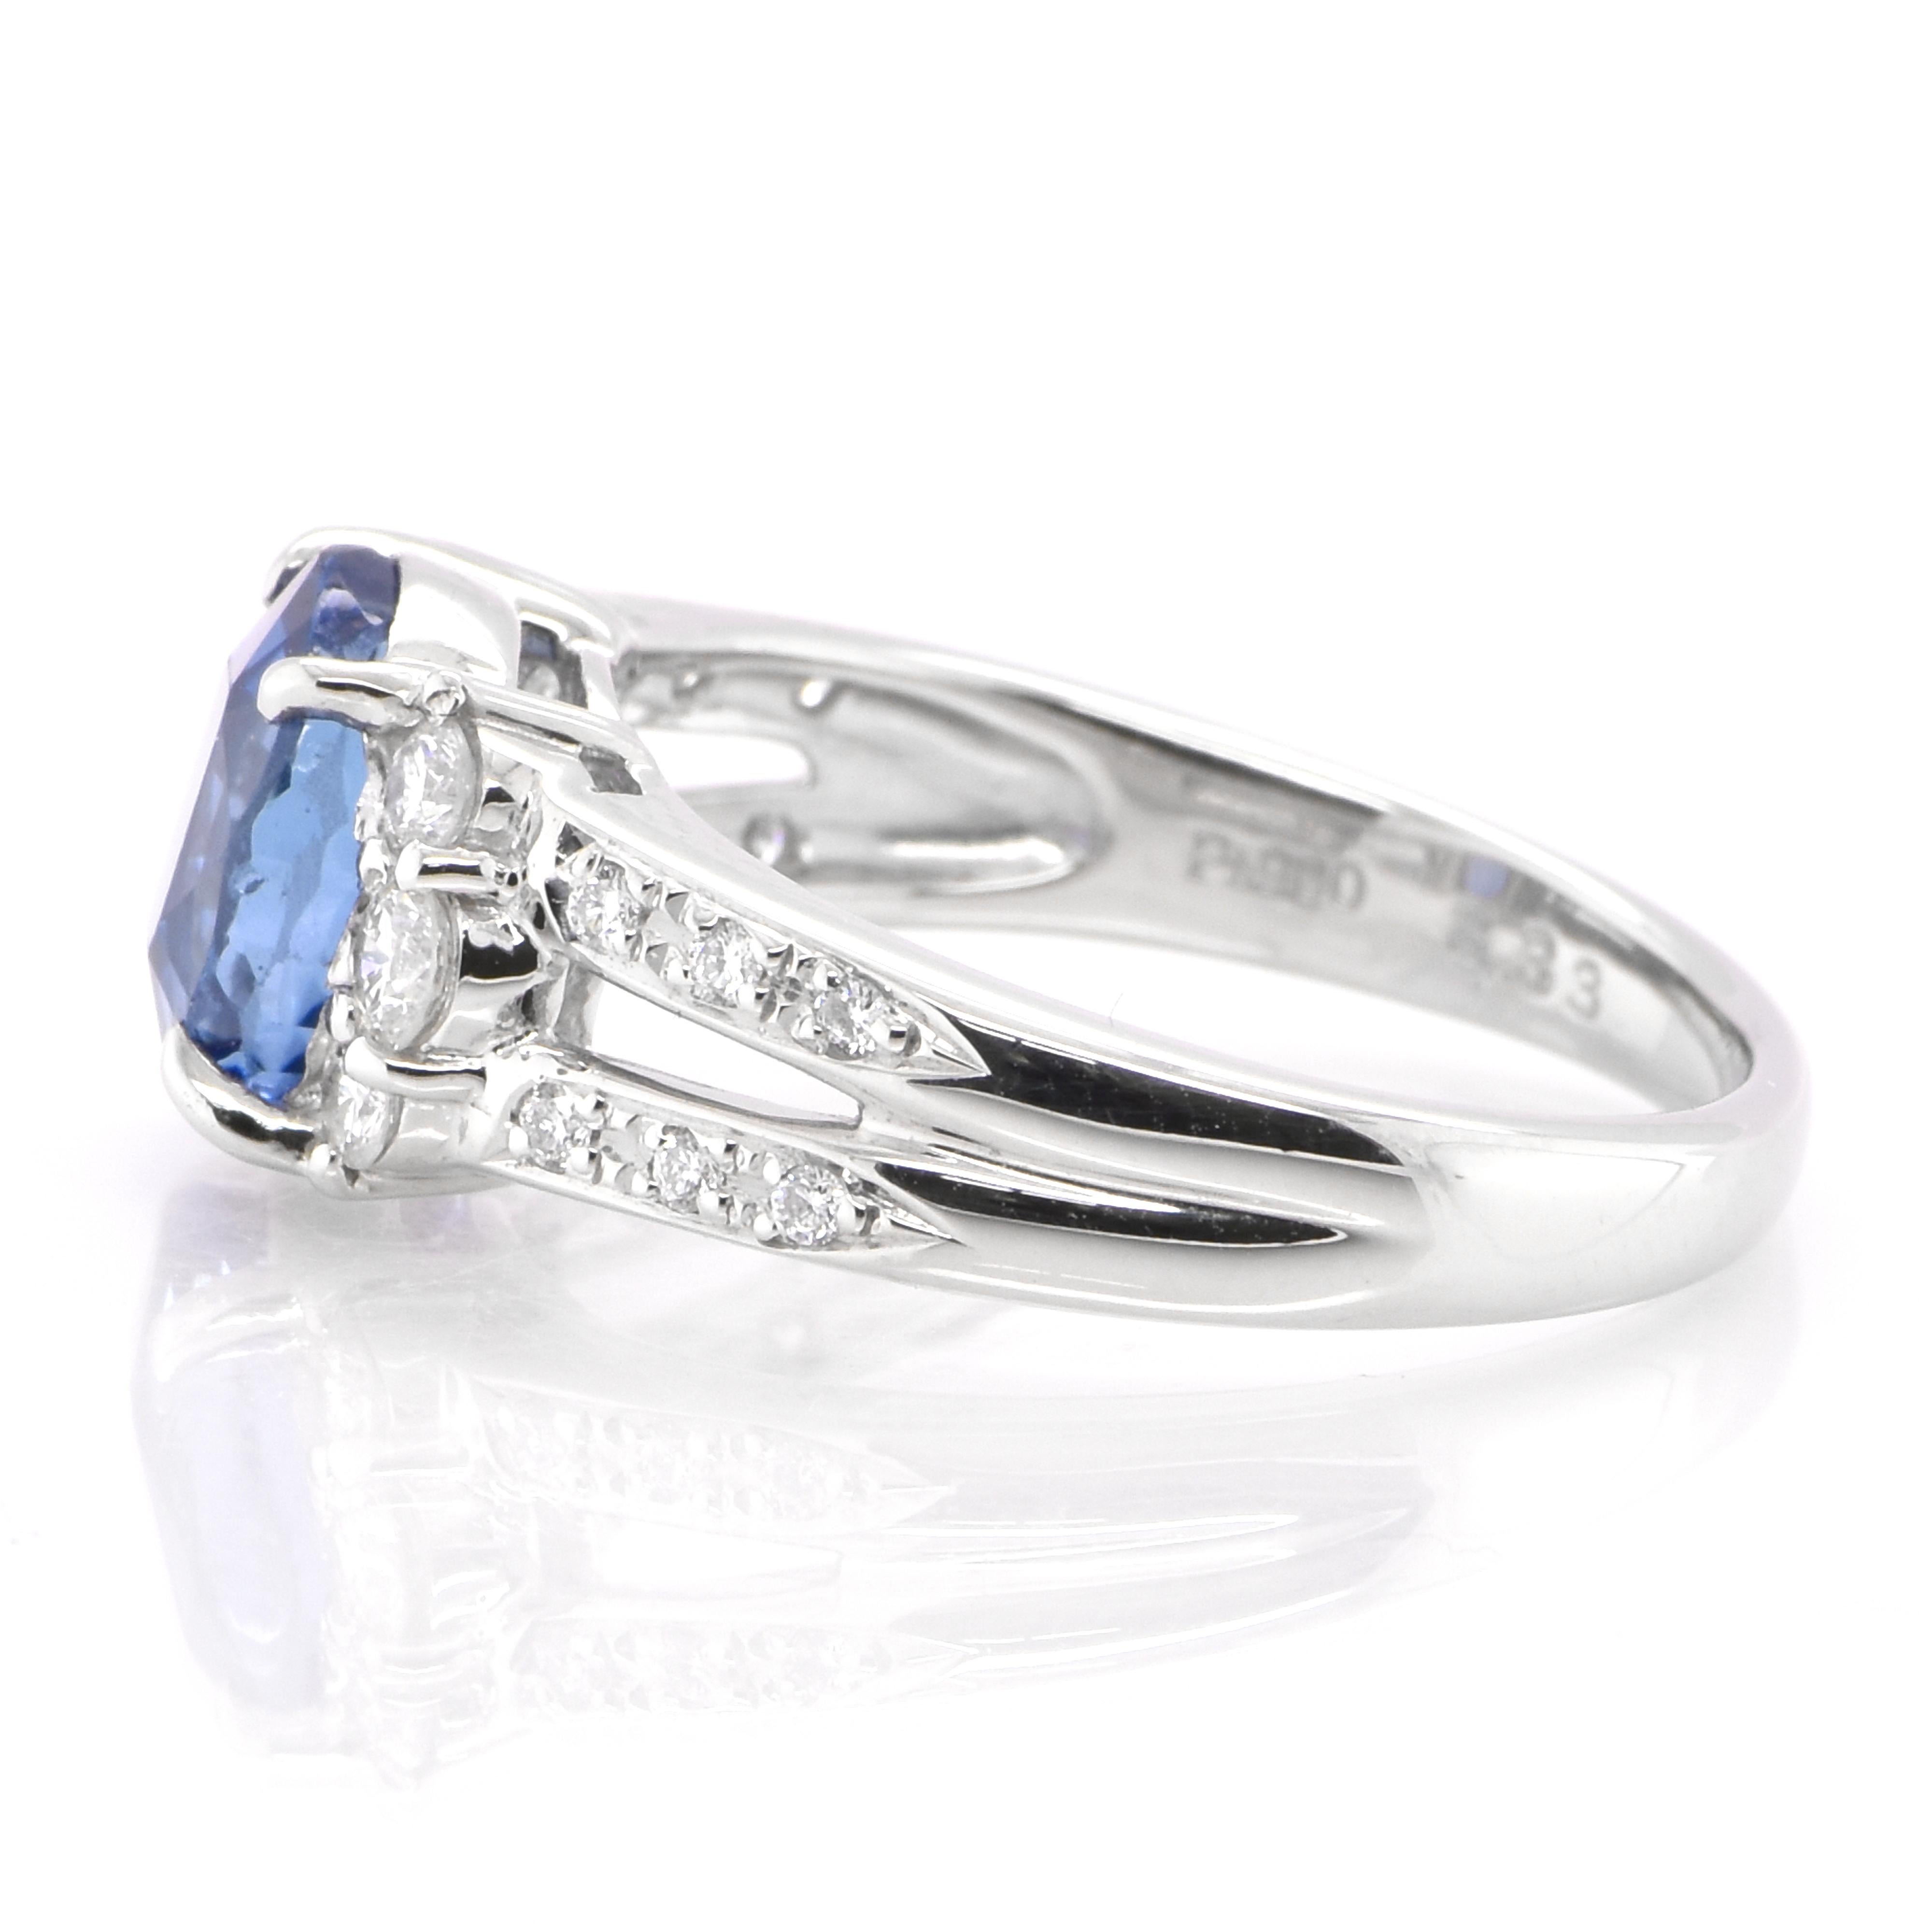 Oval Cut GIA Certified 3.33 Carat Natural Burmese, Unheated Sapphire Ring Set in Platinum For Sale